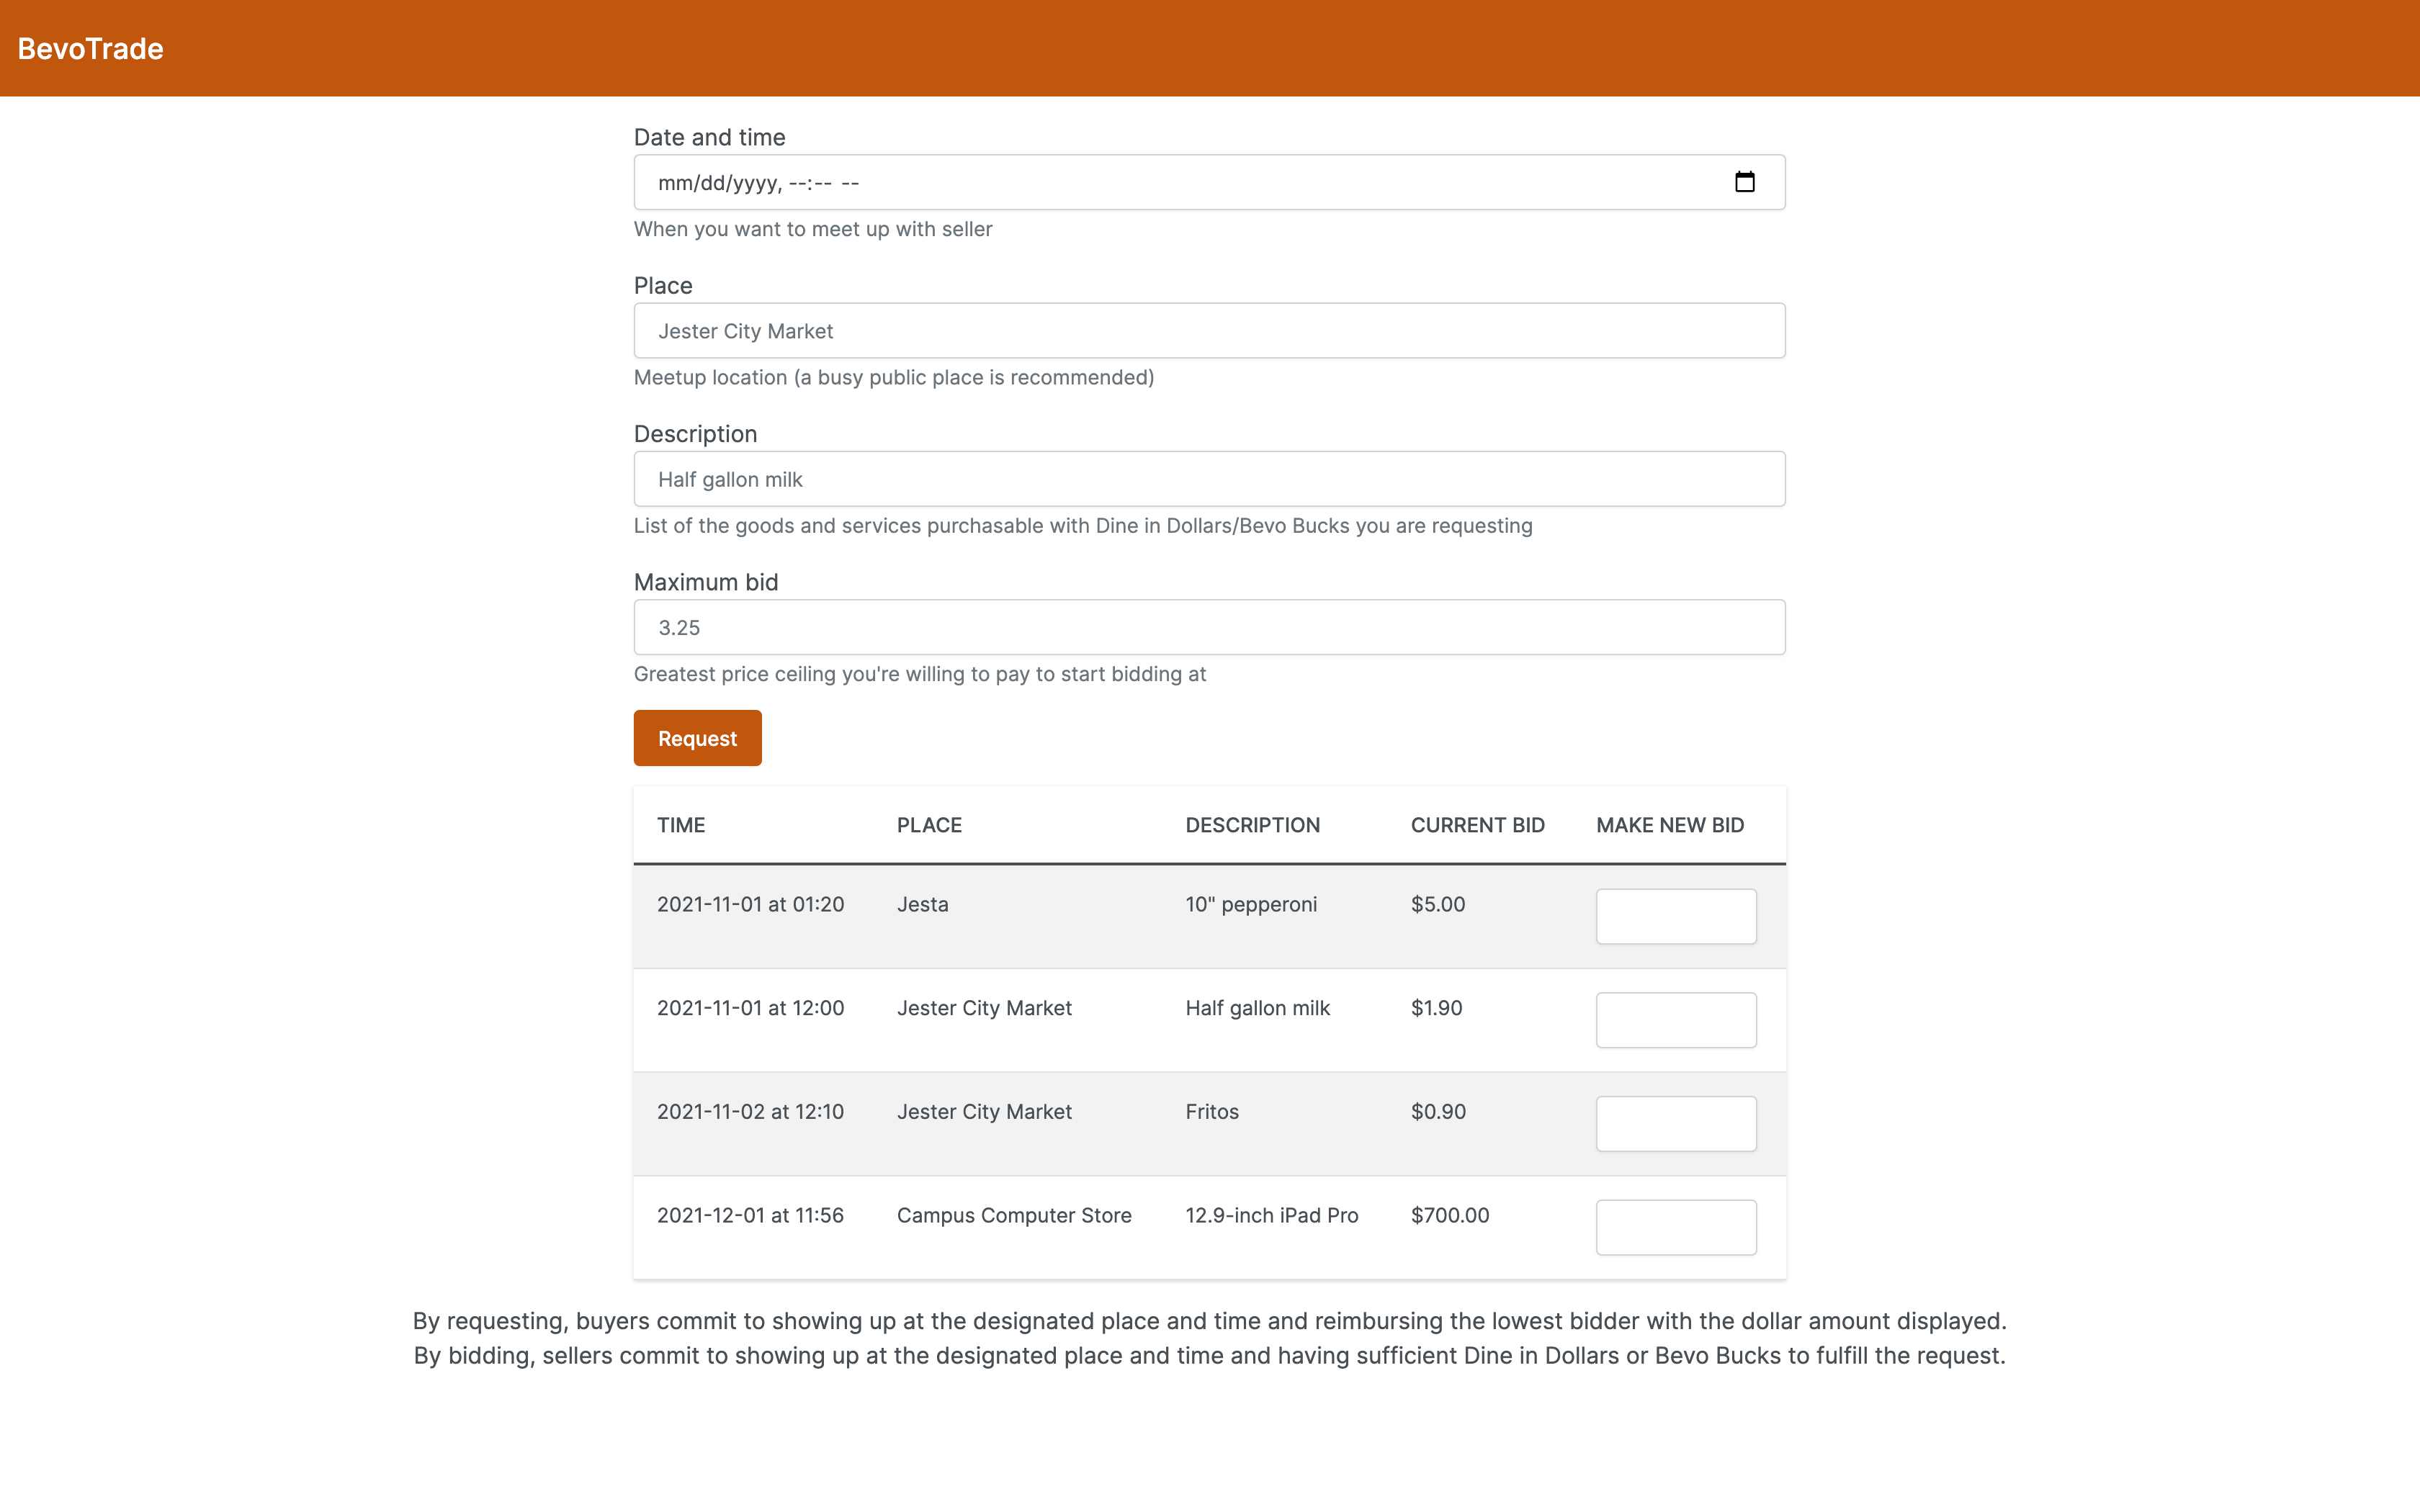 Screenshot of BevoTrade homepage with request form and bid listing